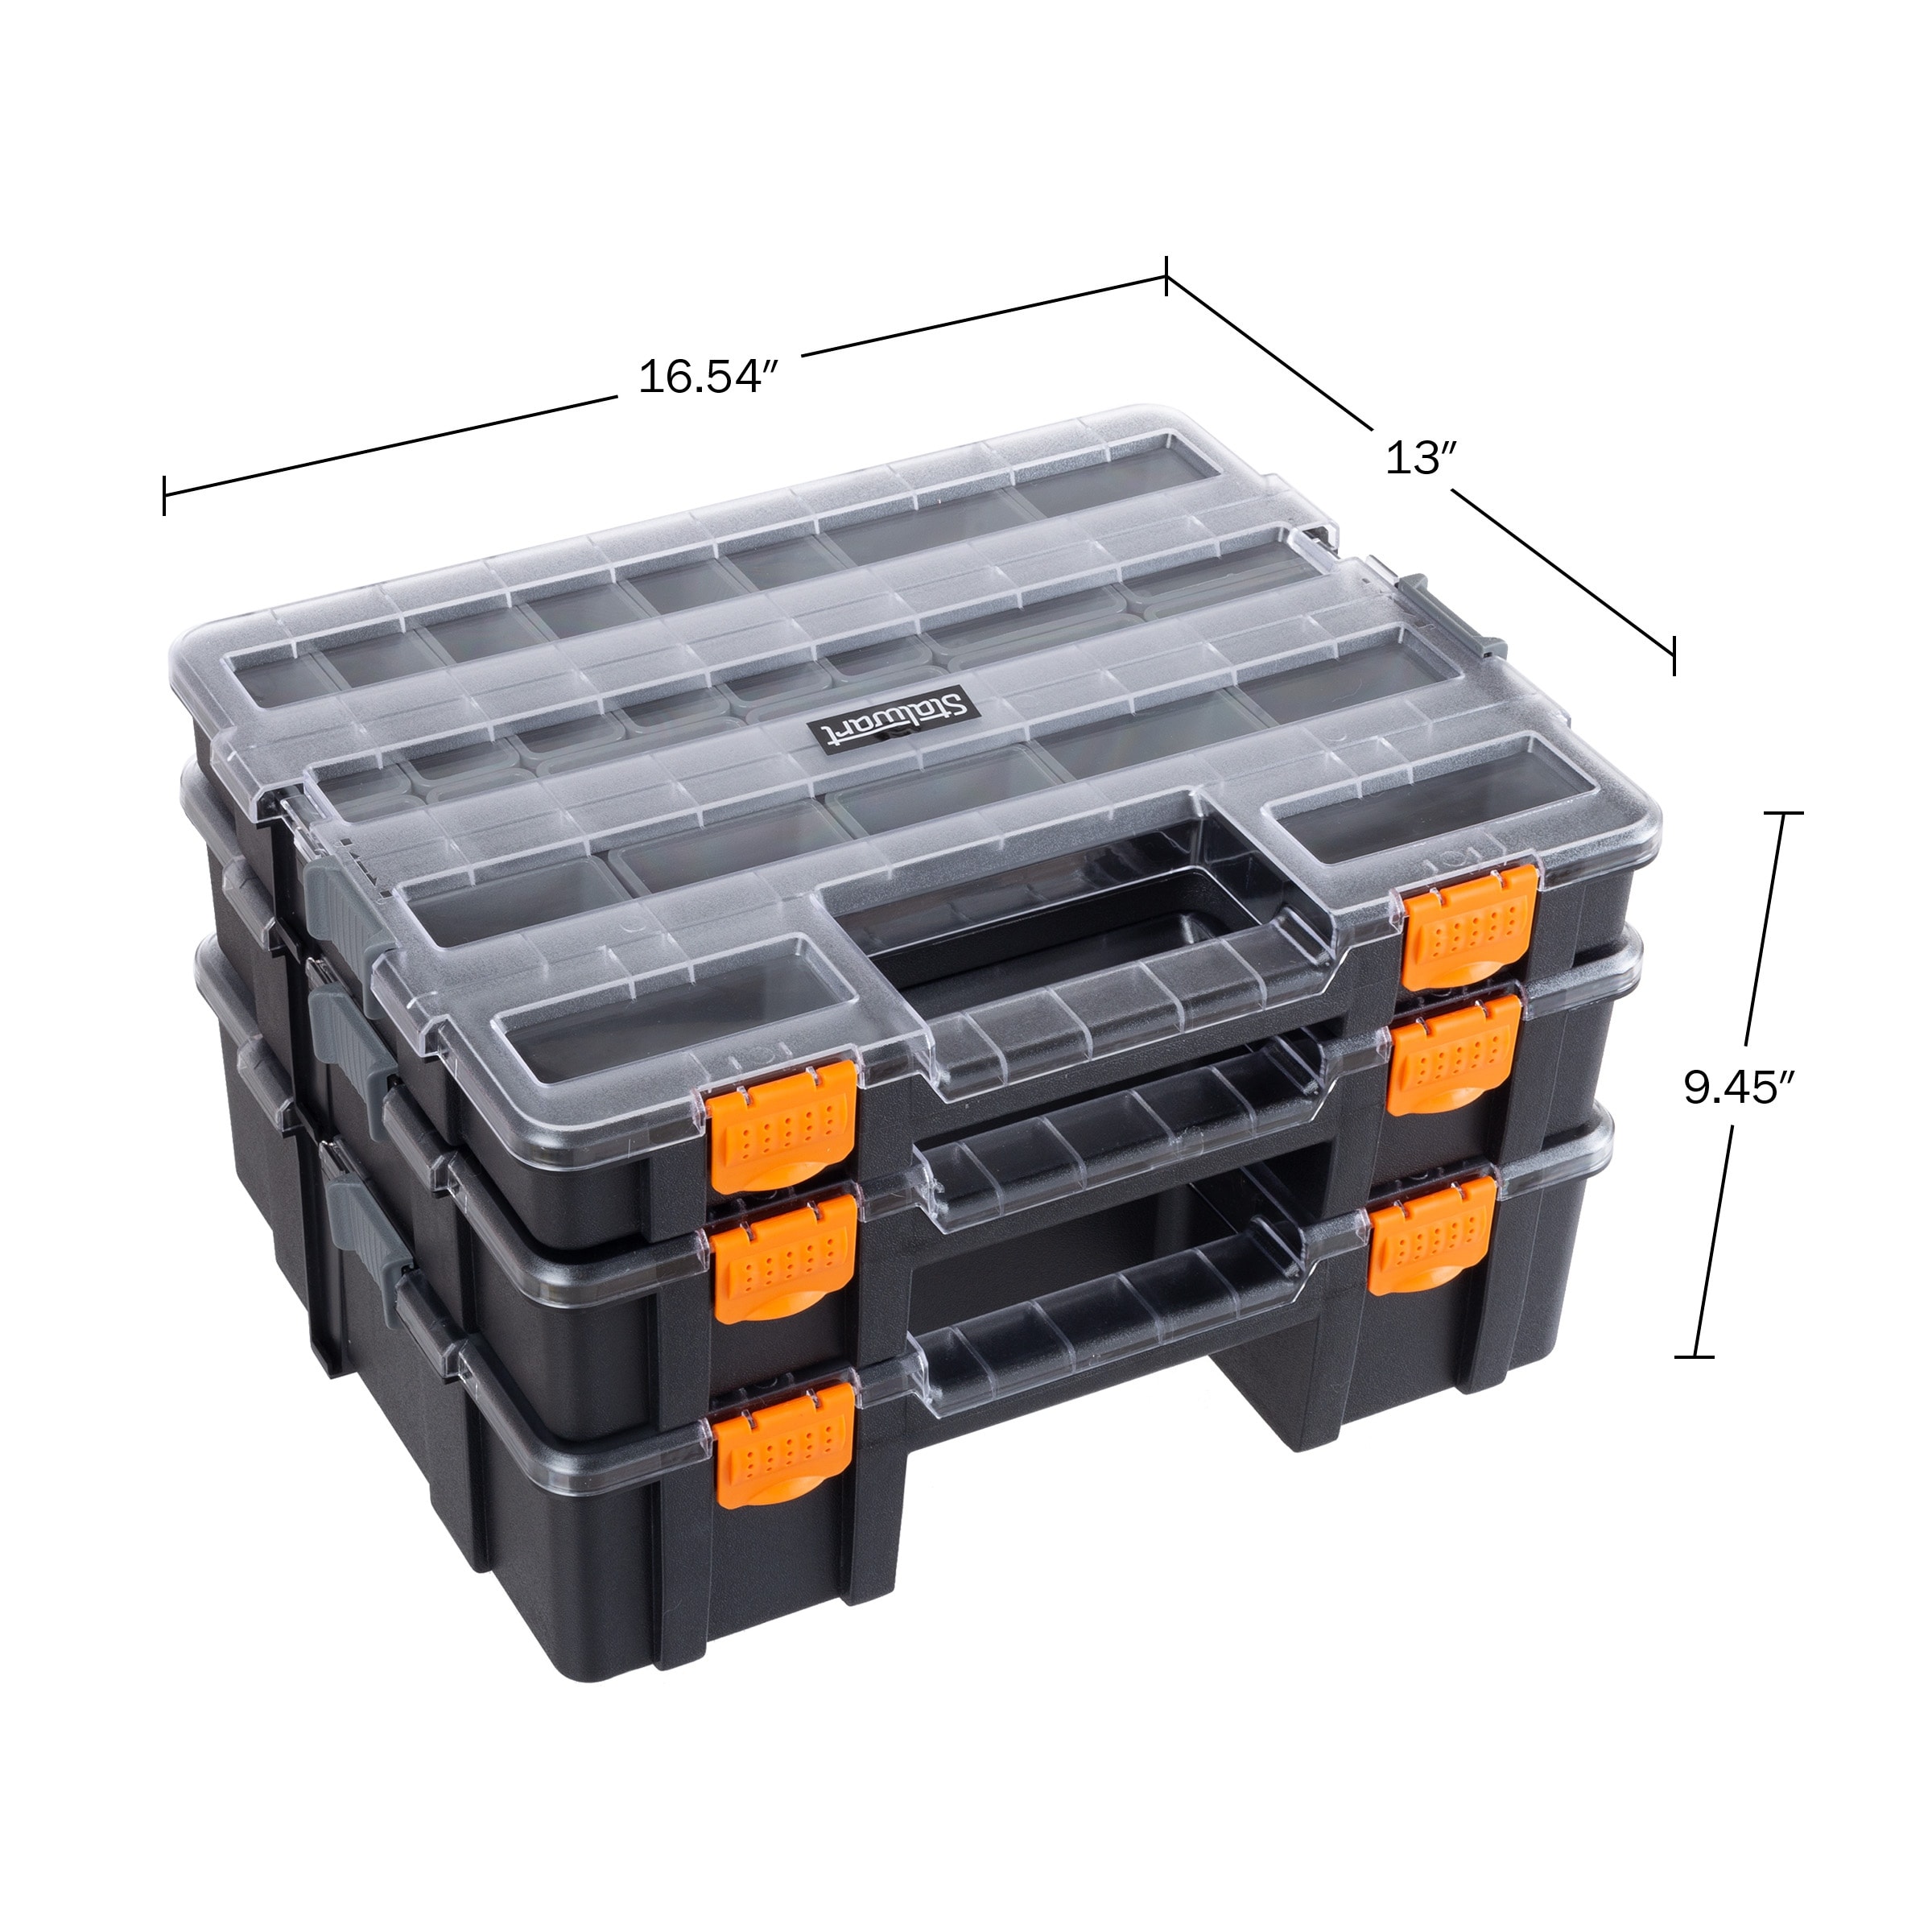 https://ak1.ostkcdn.com/images/products/is/images/direct/a905af0f5d8dd0a074104ffd9b924f844d7e980c/Tool-Box-Organizer---3-in-1-Portable-Parts-Organizer-with-52-Customizable-Compartments-by-Stalwart-%28Gray%29.jpg